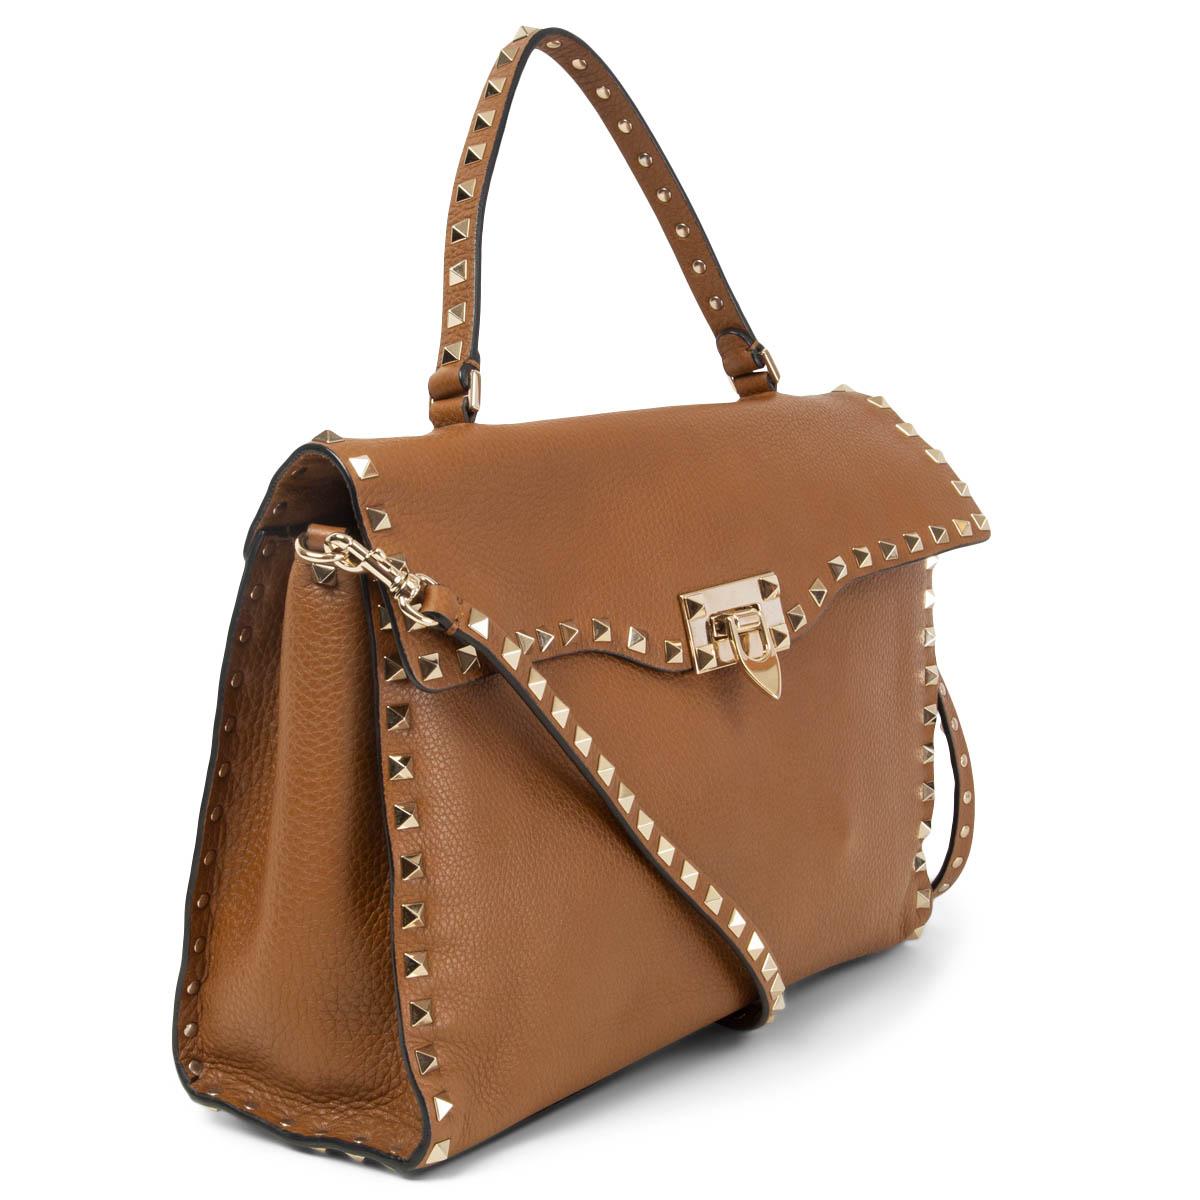 100% authentic Valentino Garavani Medium Rockstud top-handle bag in grainy brown calfskin featuring platinum-finish metal studs and hardware. Opens with a hook closure and is unlined and divided in two compartments with one big zipper pocket in the